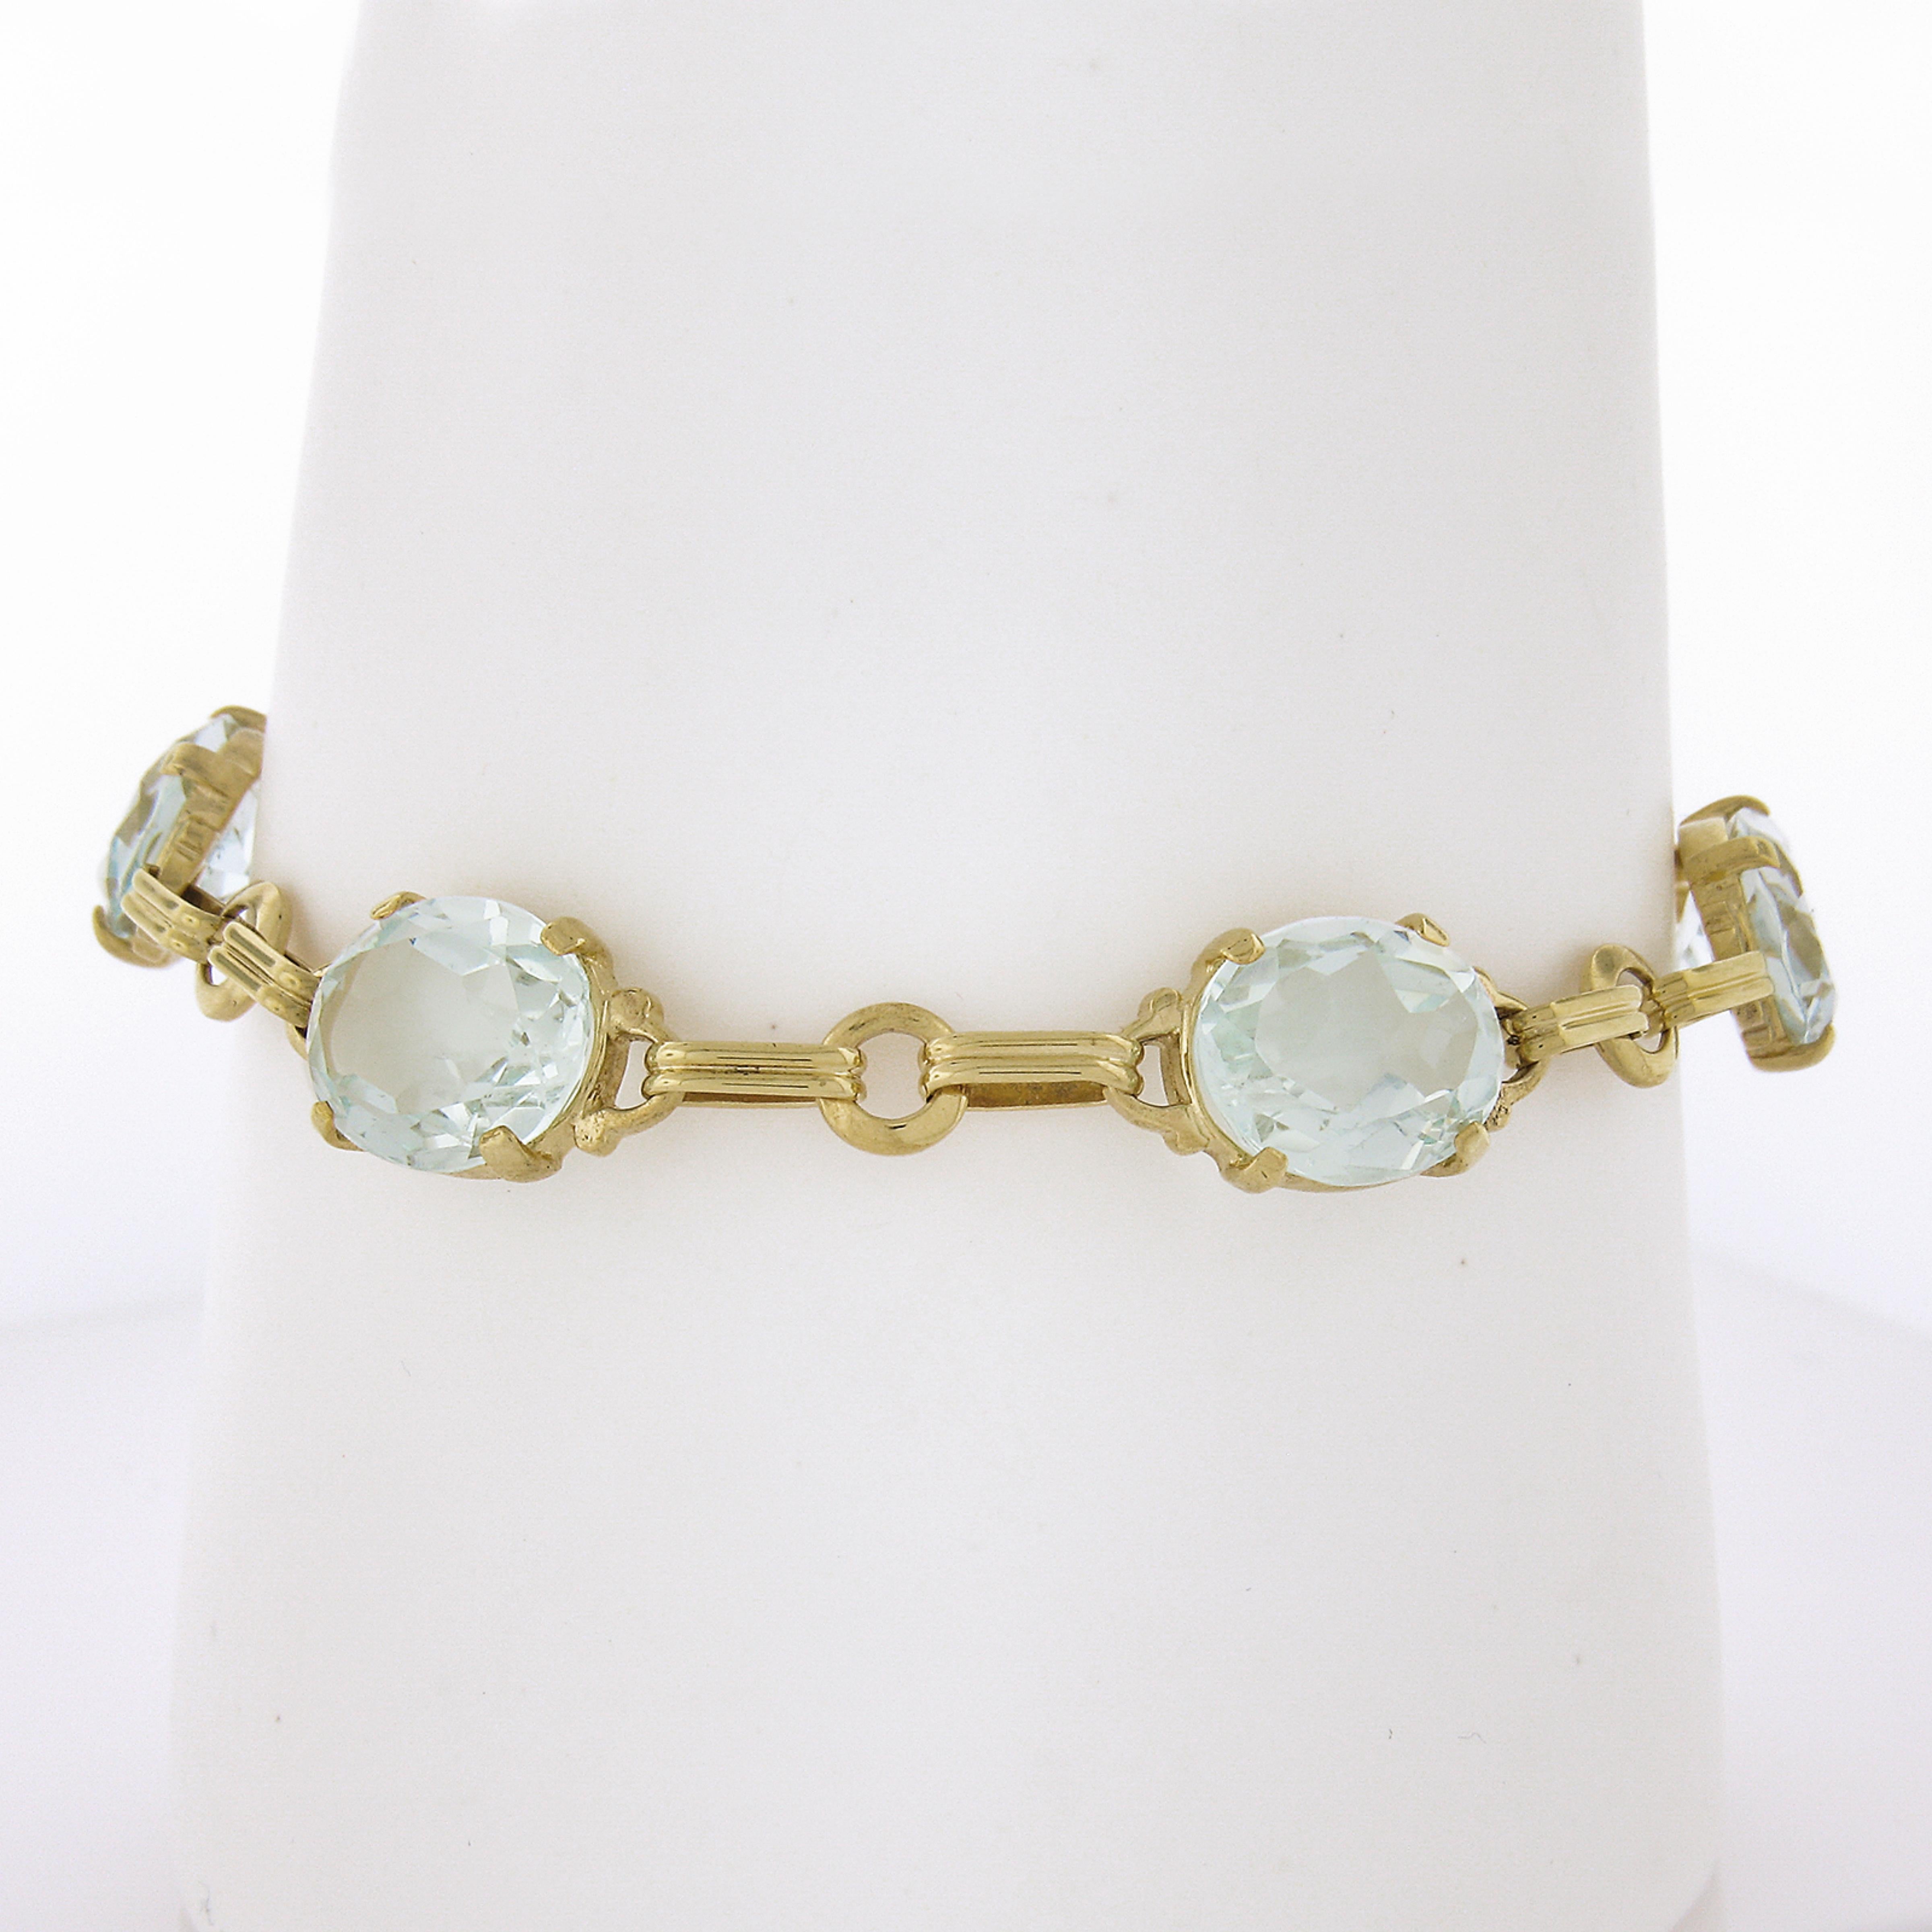 You are looking at a gorgeous, retro vintage bracelet crafted in solid 14k yellow gold and features well alternated grooved open oval & round links with 5 beautiful aquamarine accents that total approximately 21 full carats in weight. The links